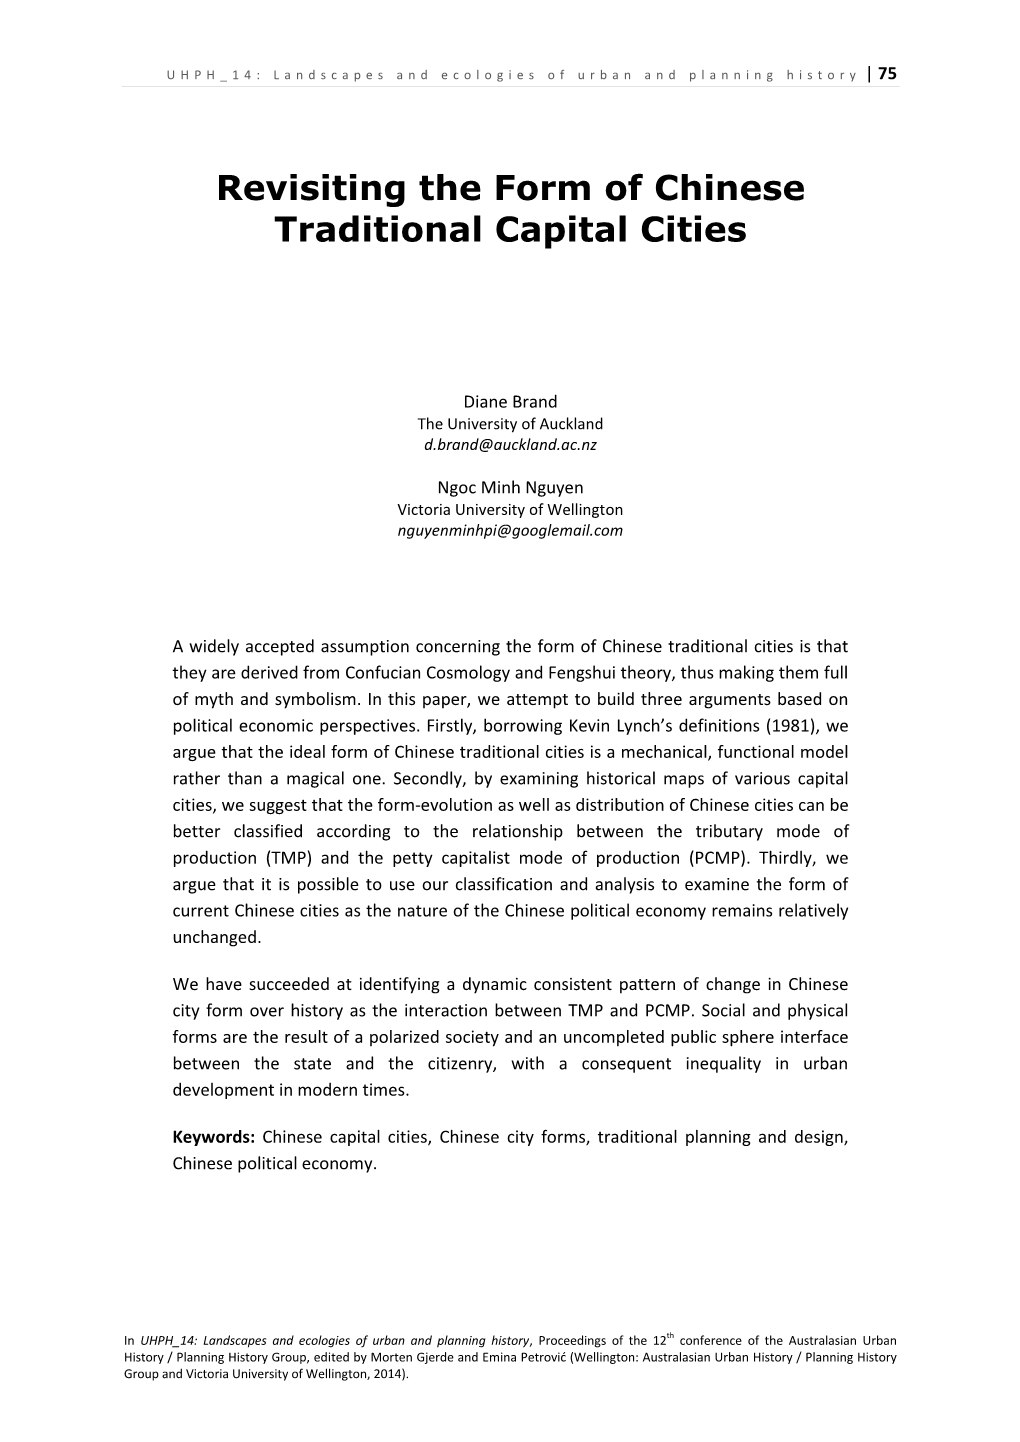 Revisiting the Form of Chinese Traditional Capital Cities